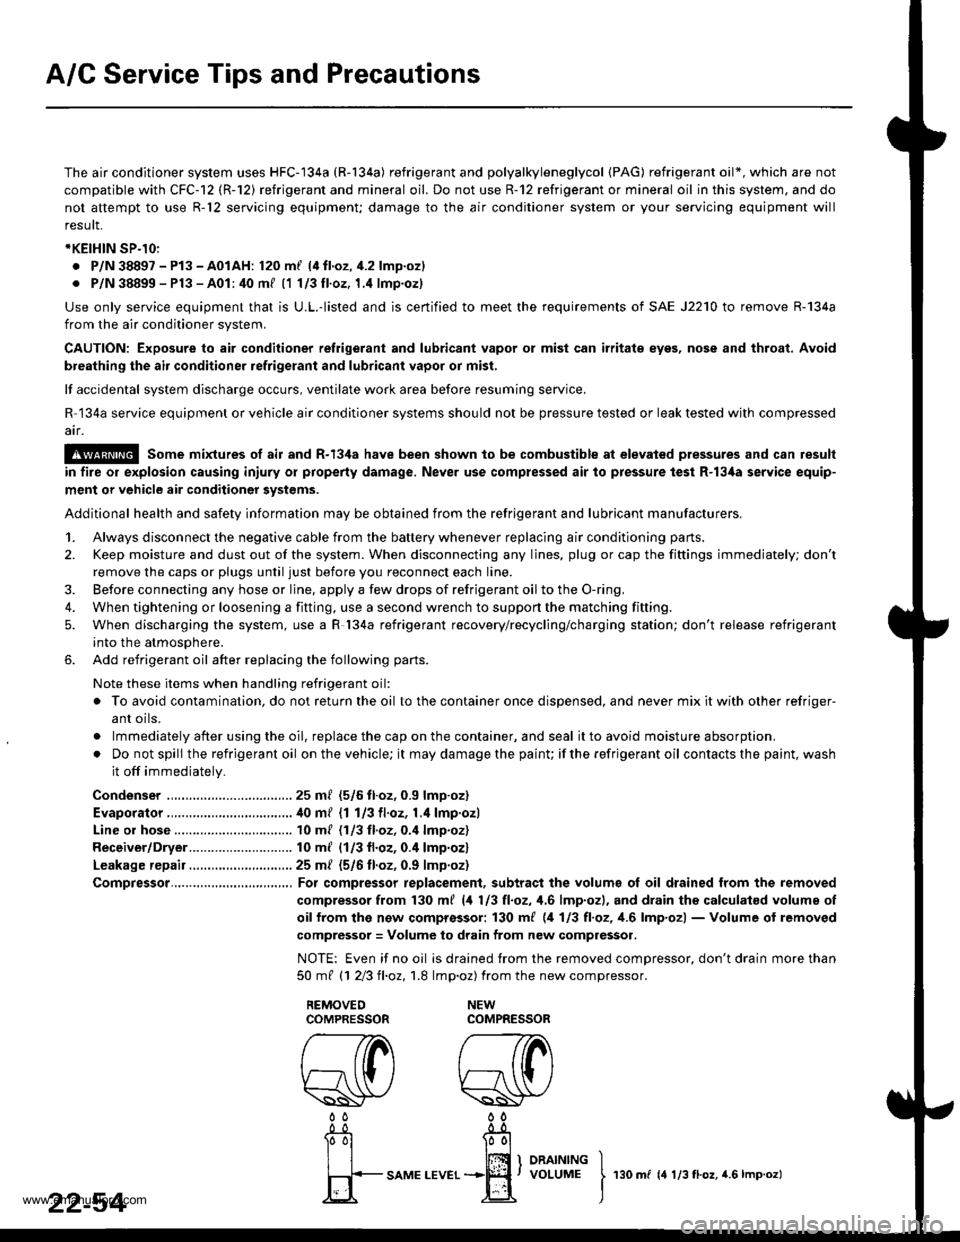 HONDA CR-V 1998 RD1-RD3 / 1.G User Guide 
A/C Service Tips and Precautions
The air conditioner system uses HFC-134a (R-134a) refrigerant and polyalkyleneglycol {PAG) refrigerant oil*, which are not
compatible with CFC-12 (R-12) refrigerant 